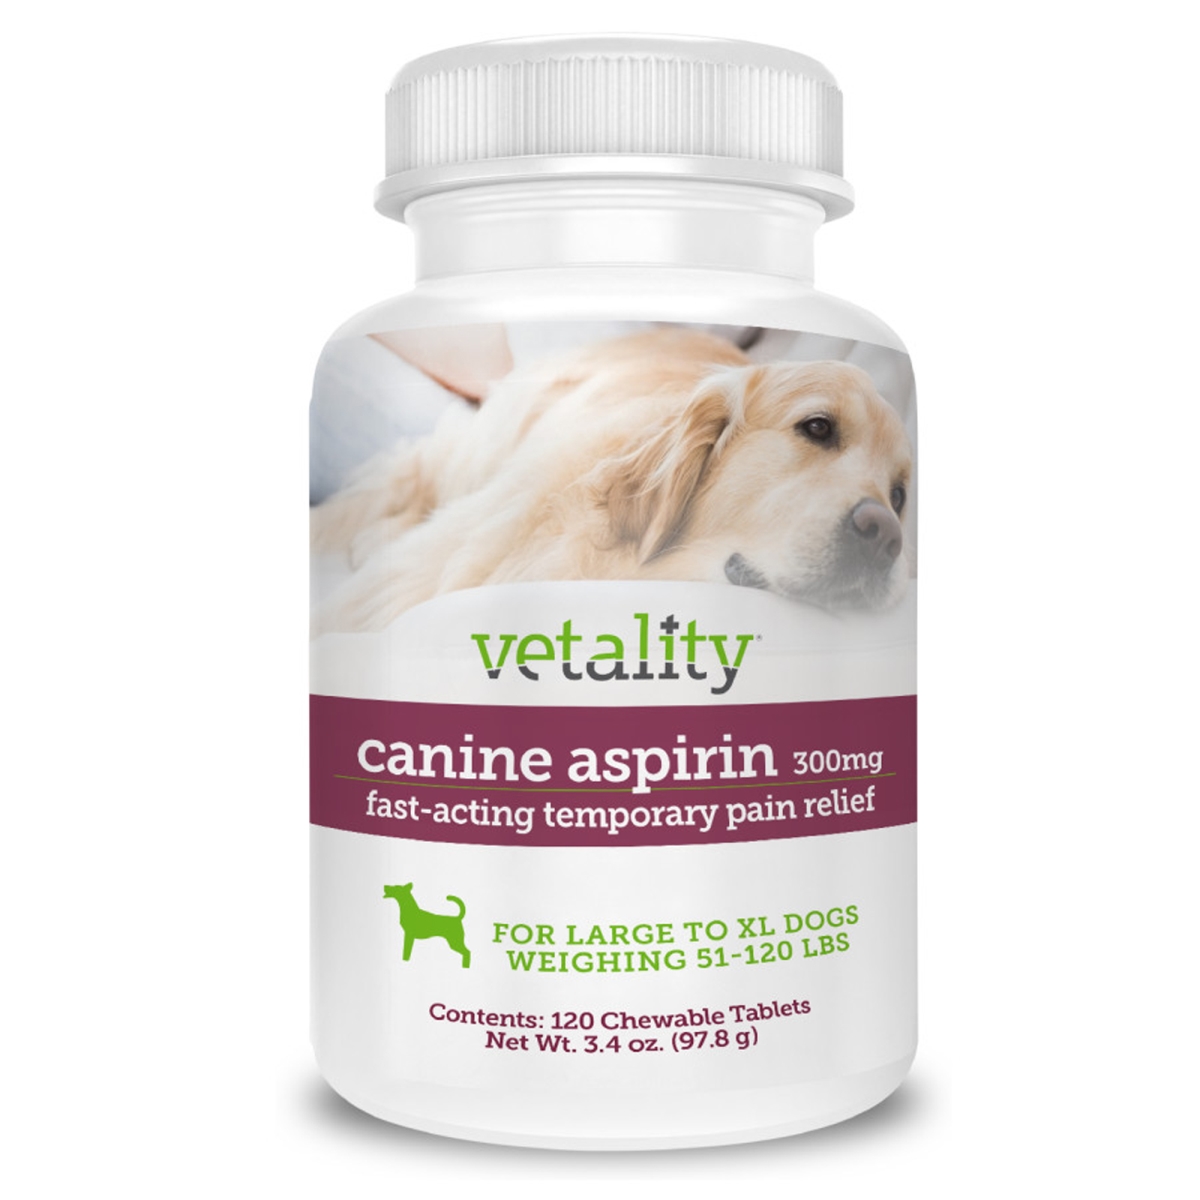 Picture of Tevra Brands 190623300639 300mg Vetality Canine Aspirin Chewable Tables - 120 Count